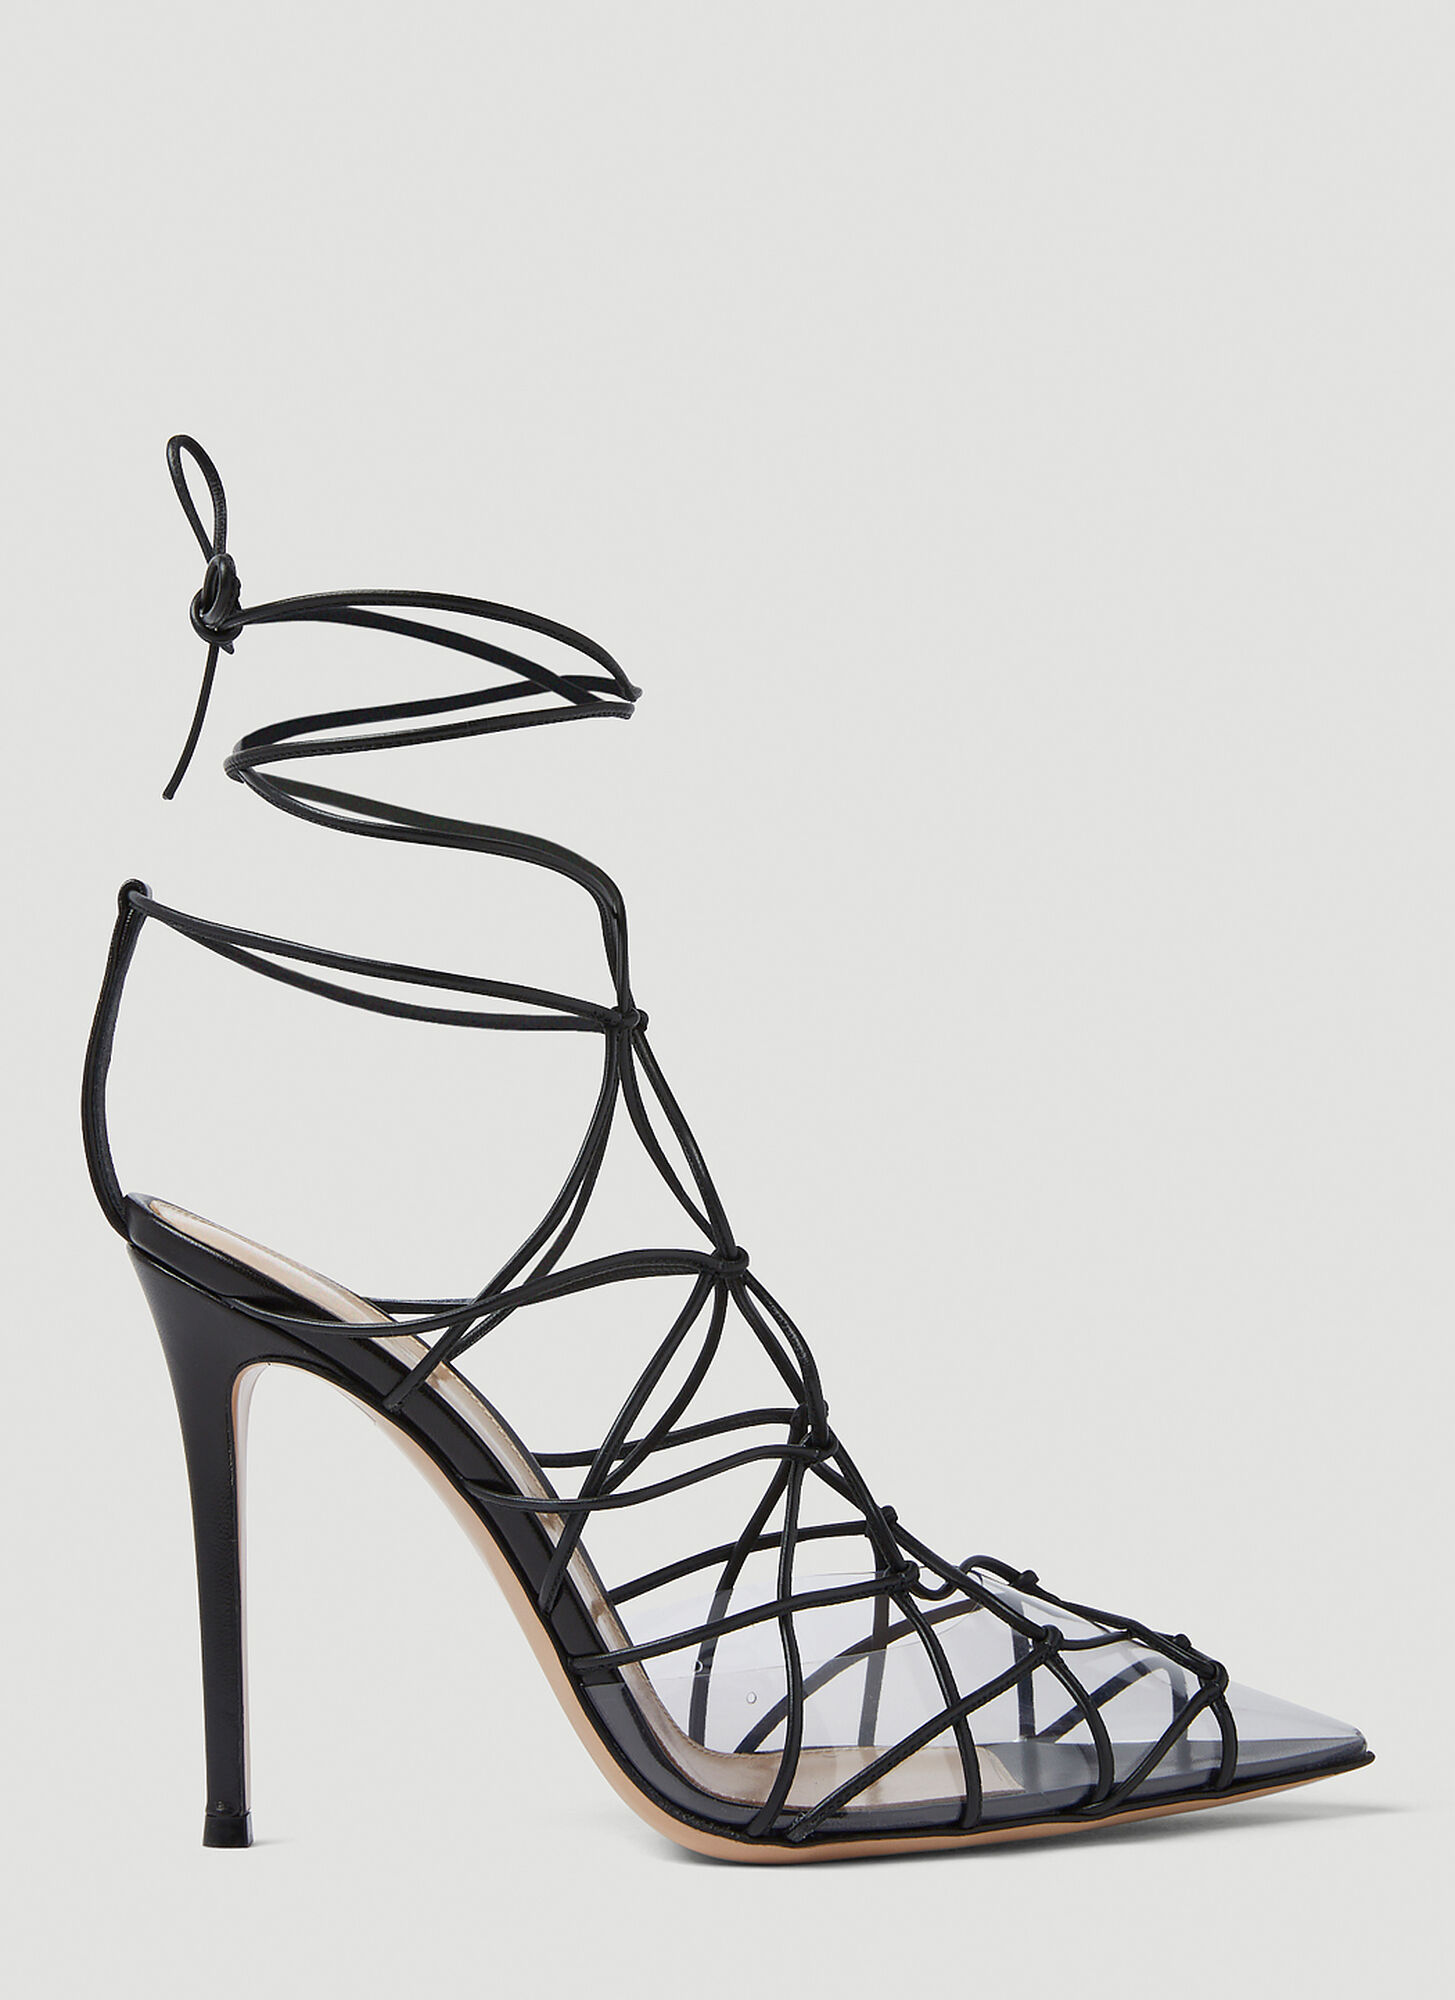 Gianvito Rossi Lace Up High Heels Female Black | ModeSens